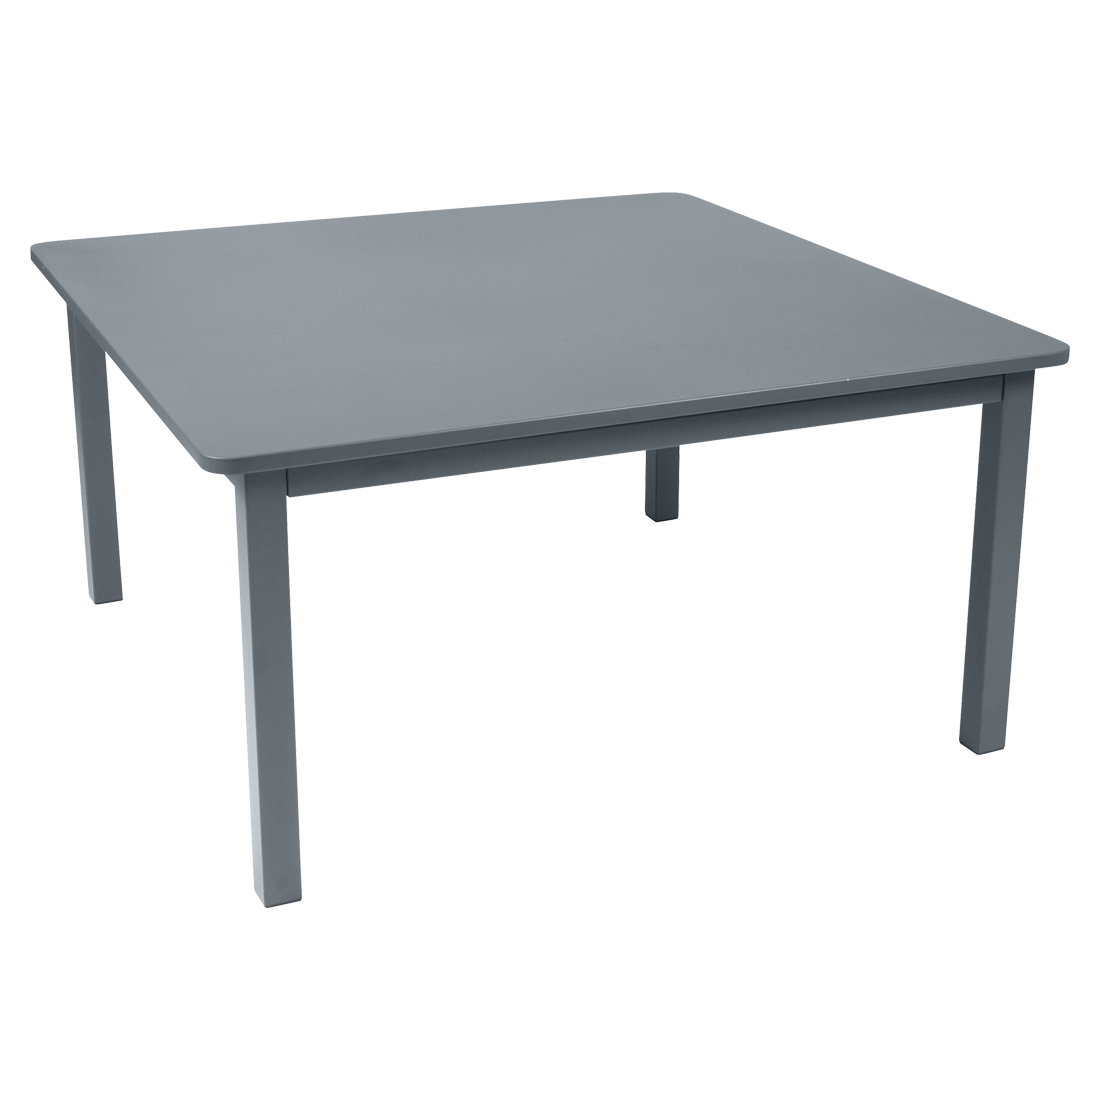 Craft Square Table 143 x143